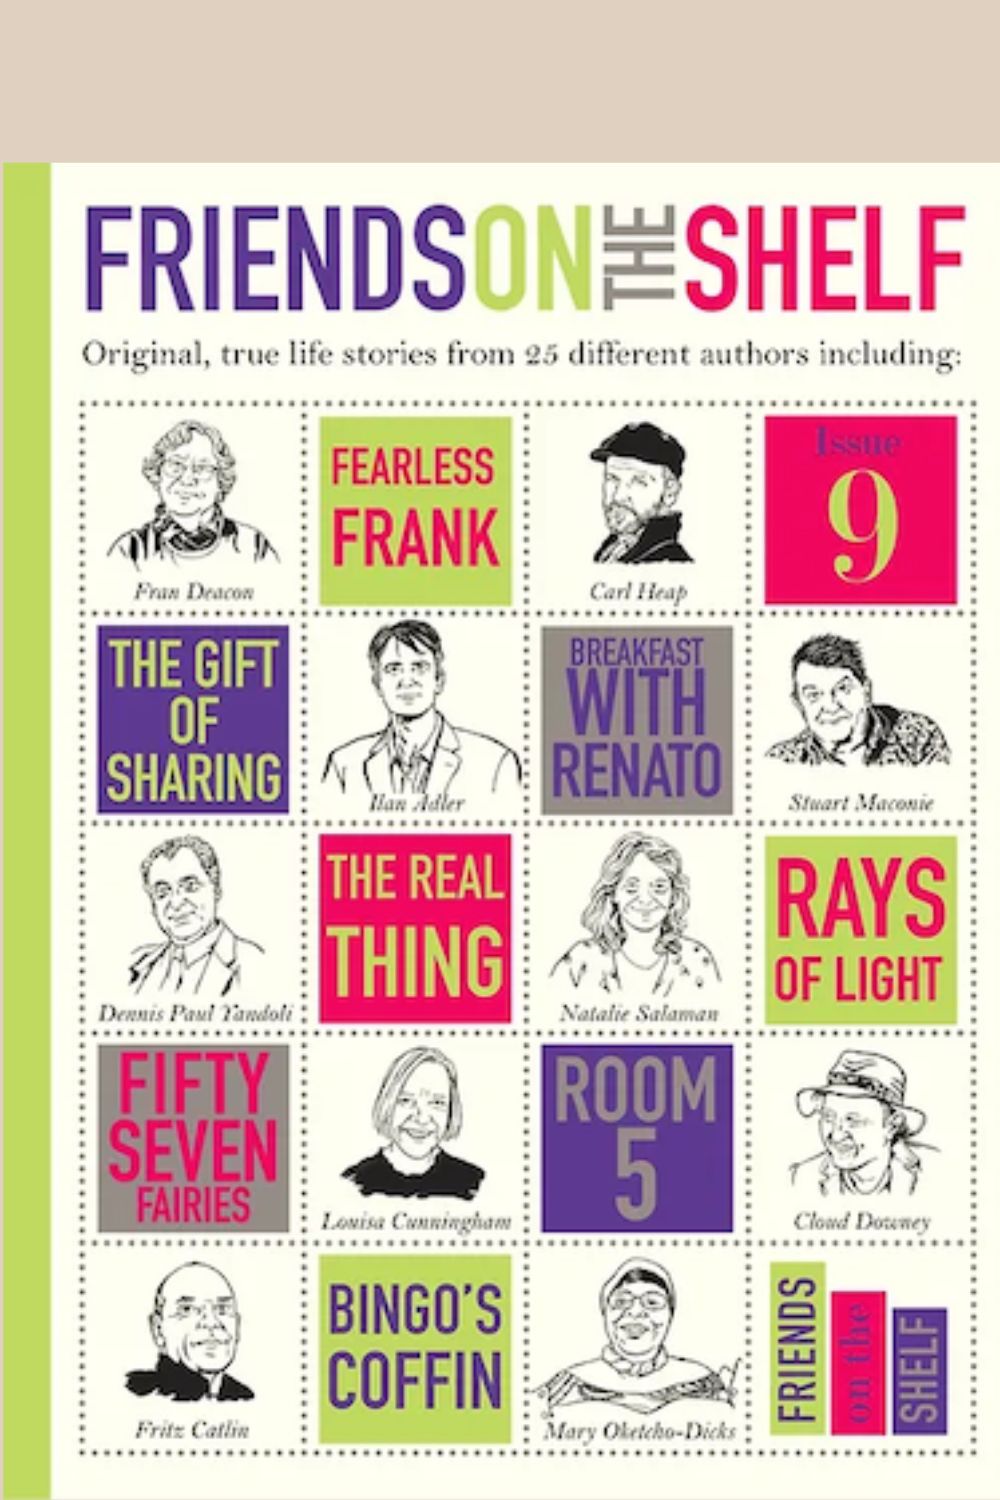 Friends on the Shelf Issue 9 cover (story titles with pen illustrations of the authors)